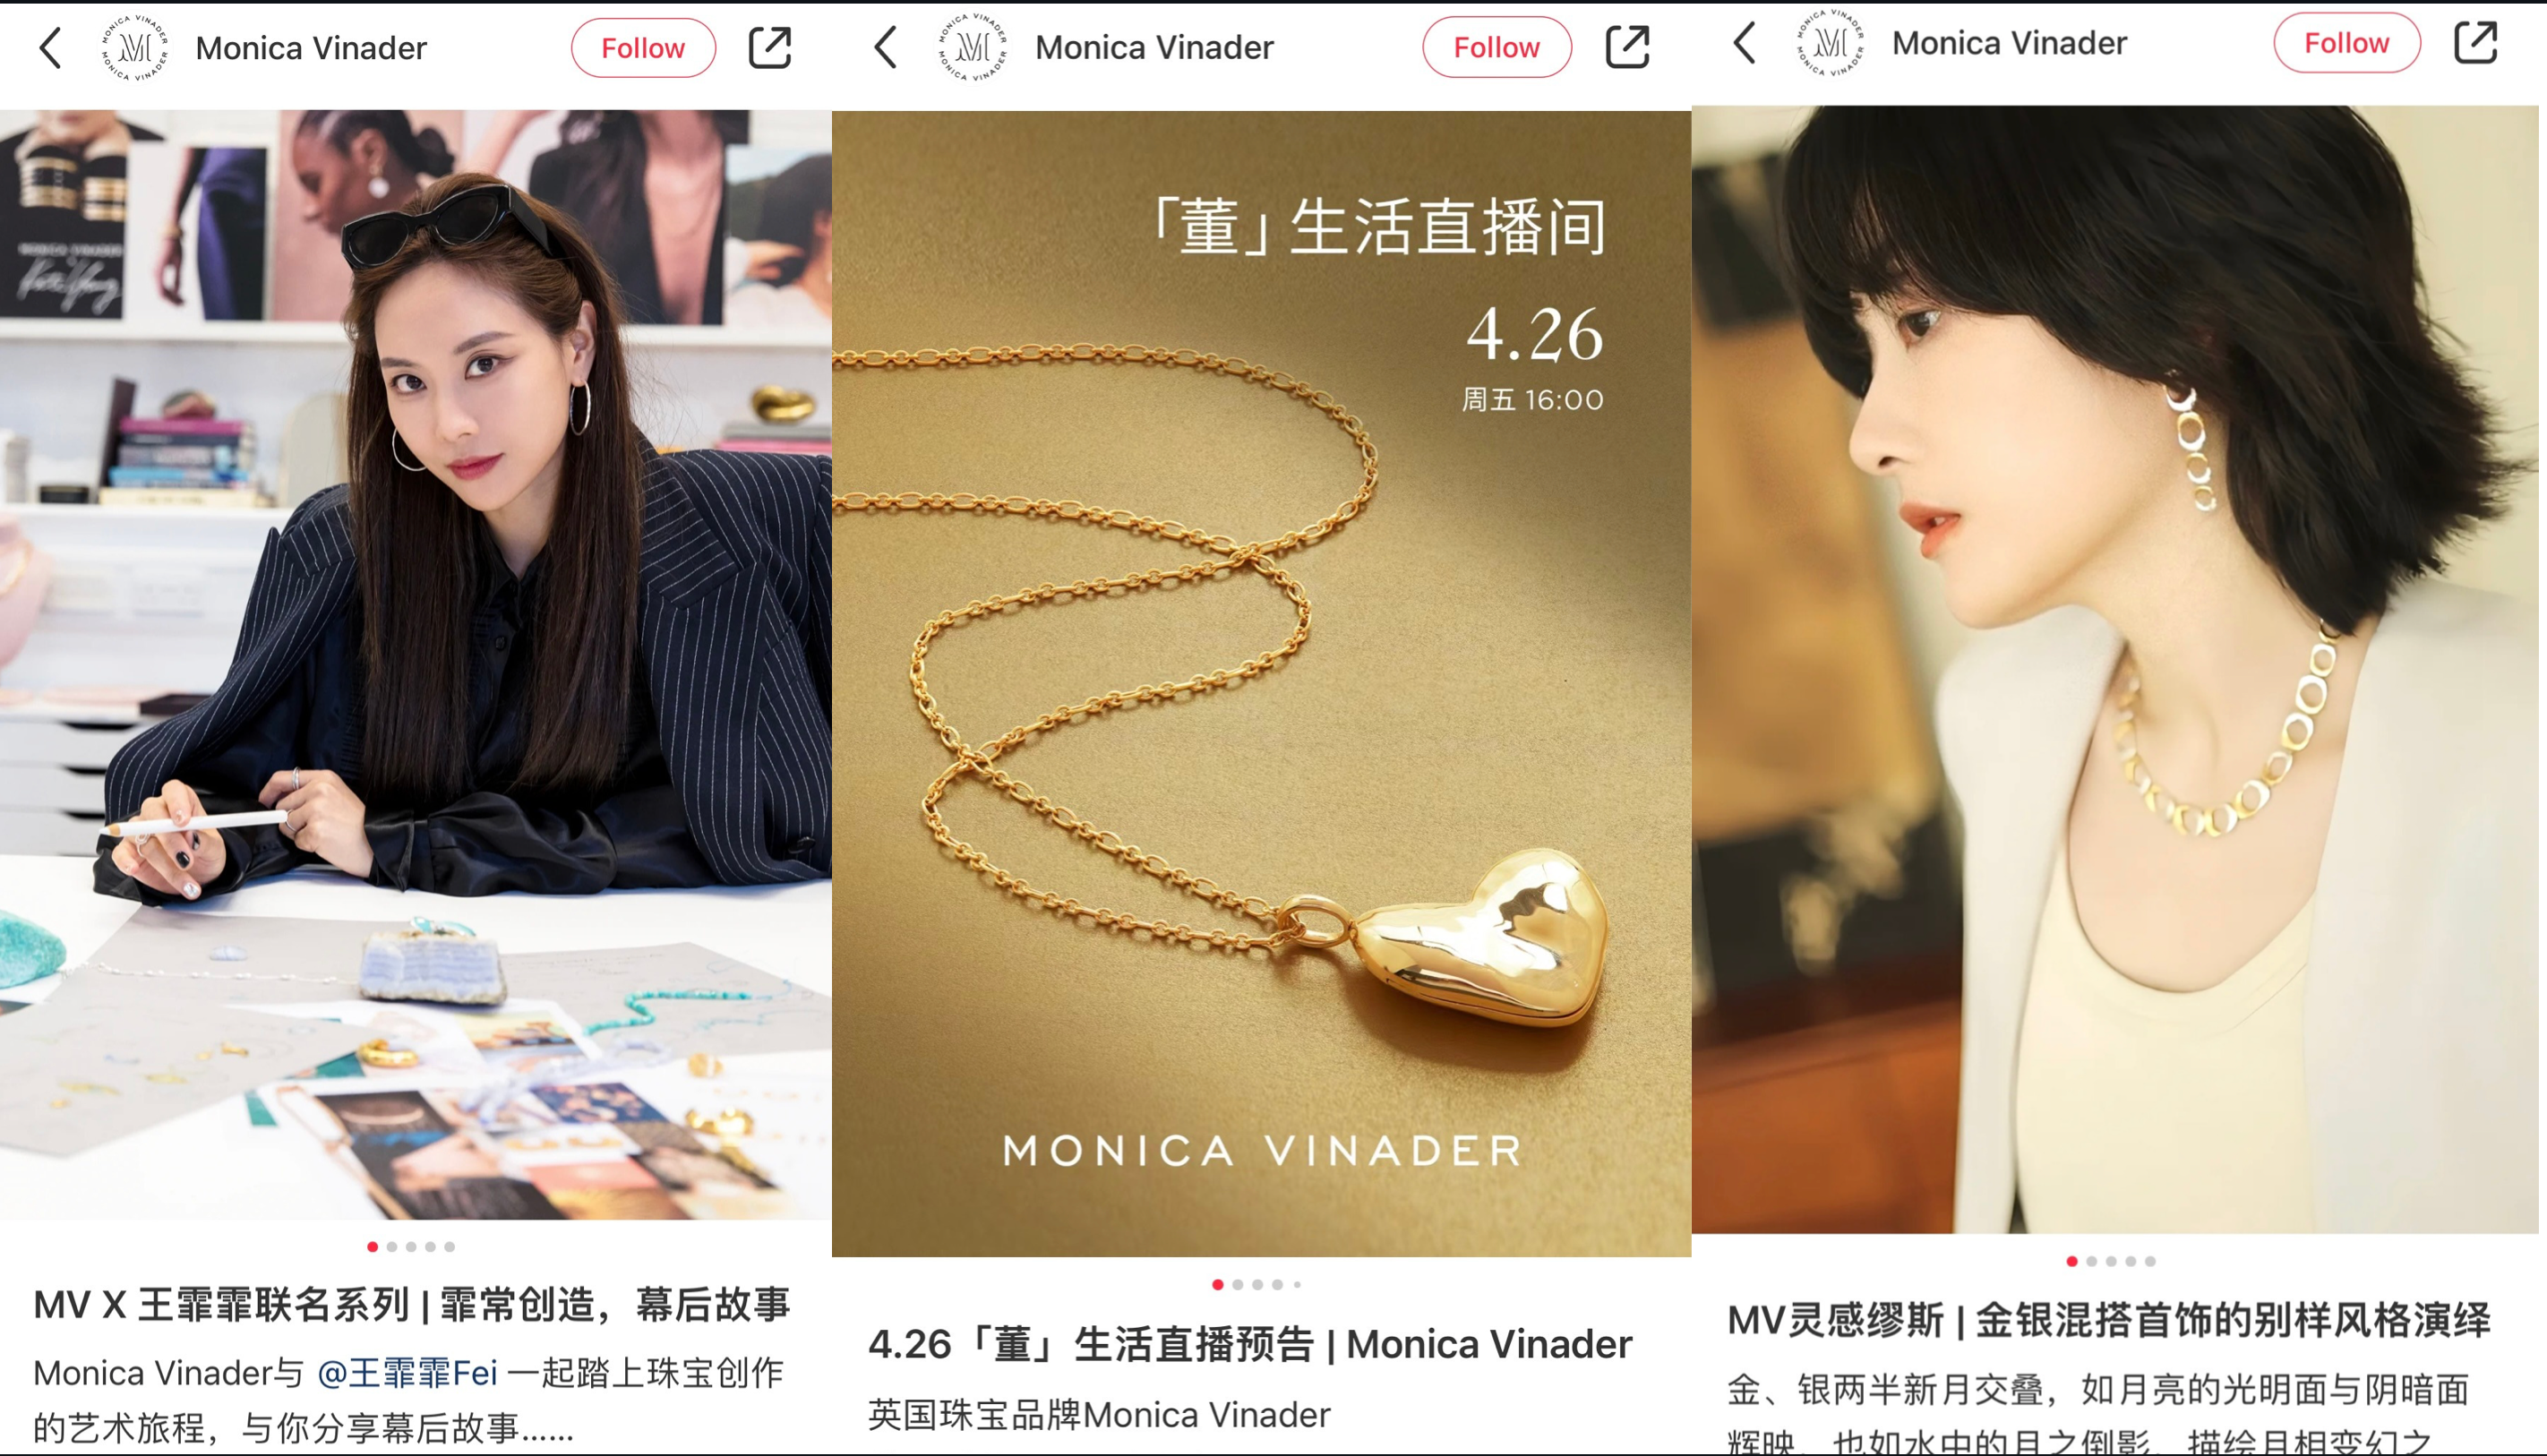 Monica Vinader's digital-first strategy across China has spurred impressive growth. Image: Xiaohongshu